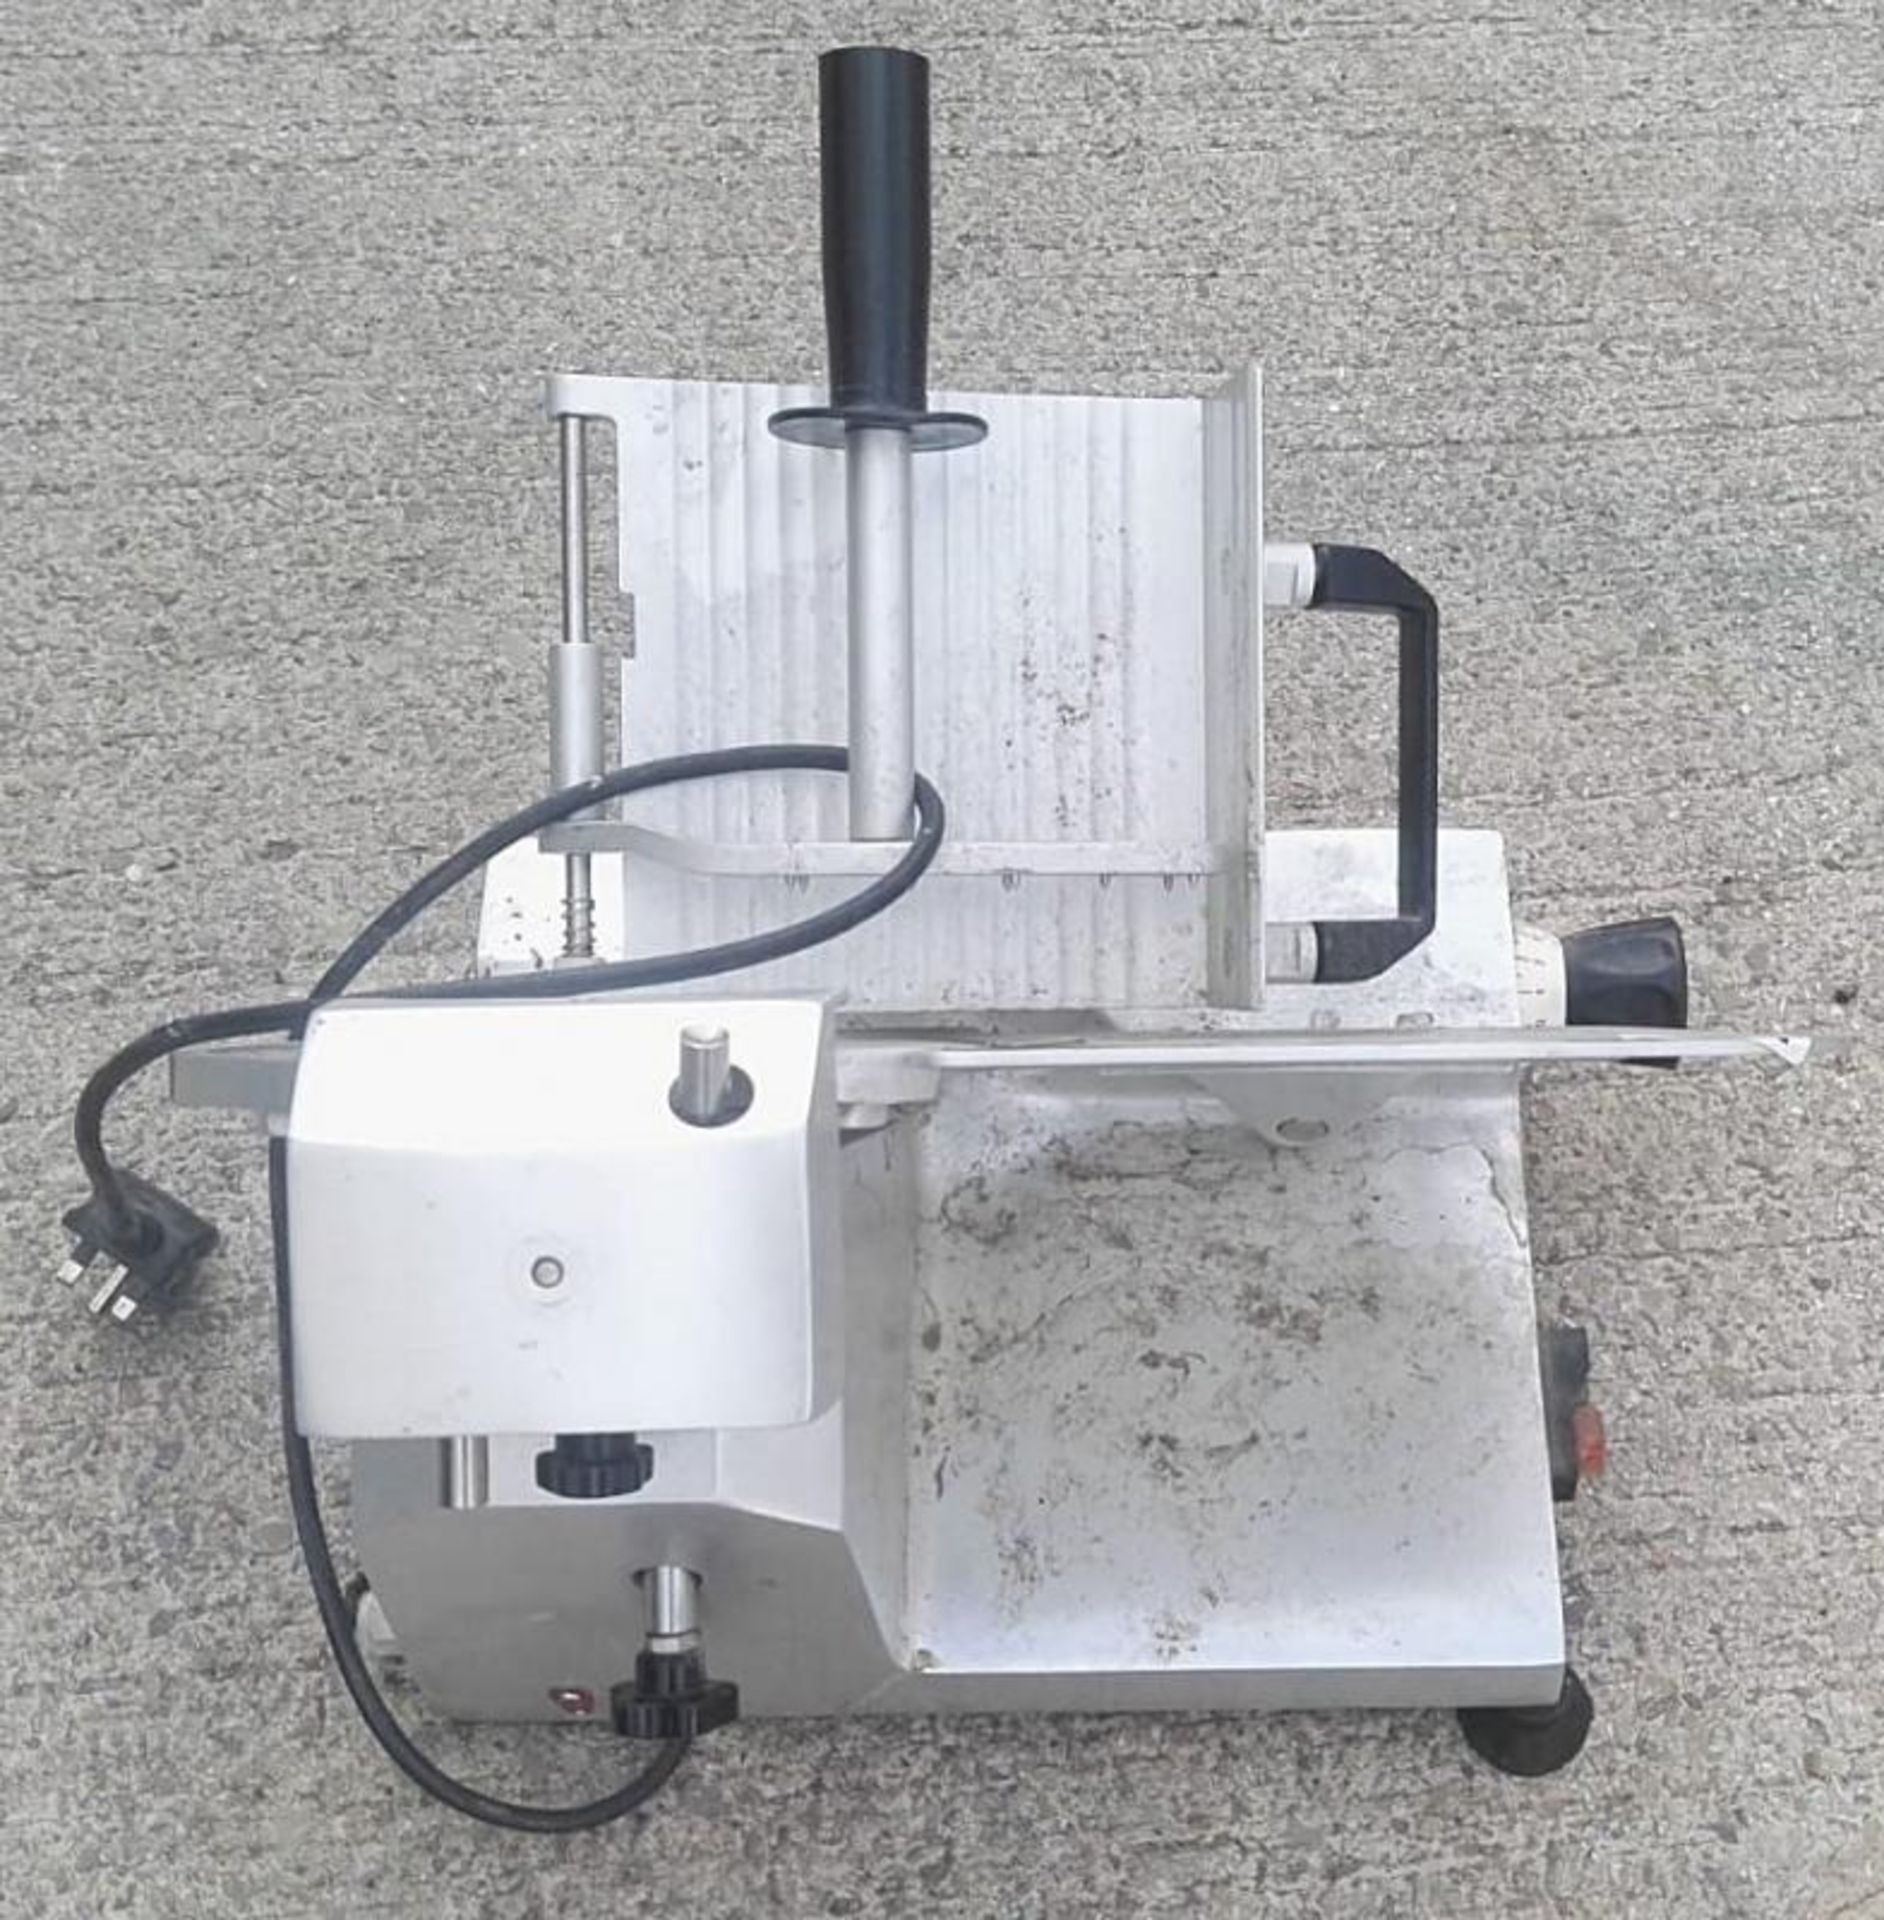 1 x BUFFALO Meat Slicer - Pre-owned, Taken From An Asian Fusion Restaurant - Ref: MC739 - CL540 - WH - Bild 2 aus 3